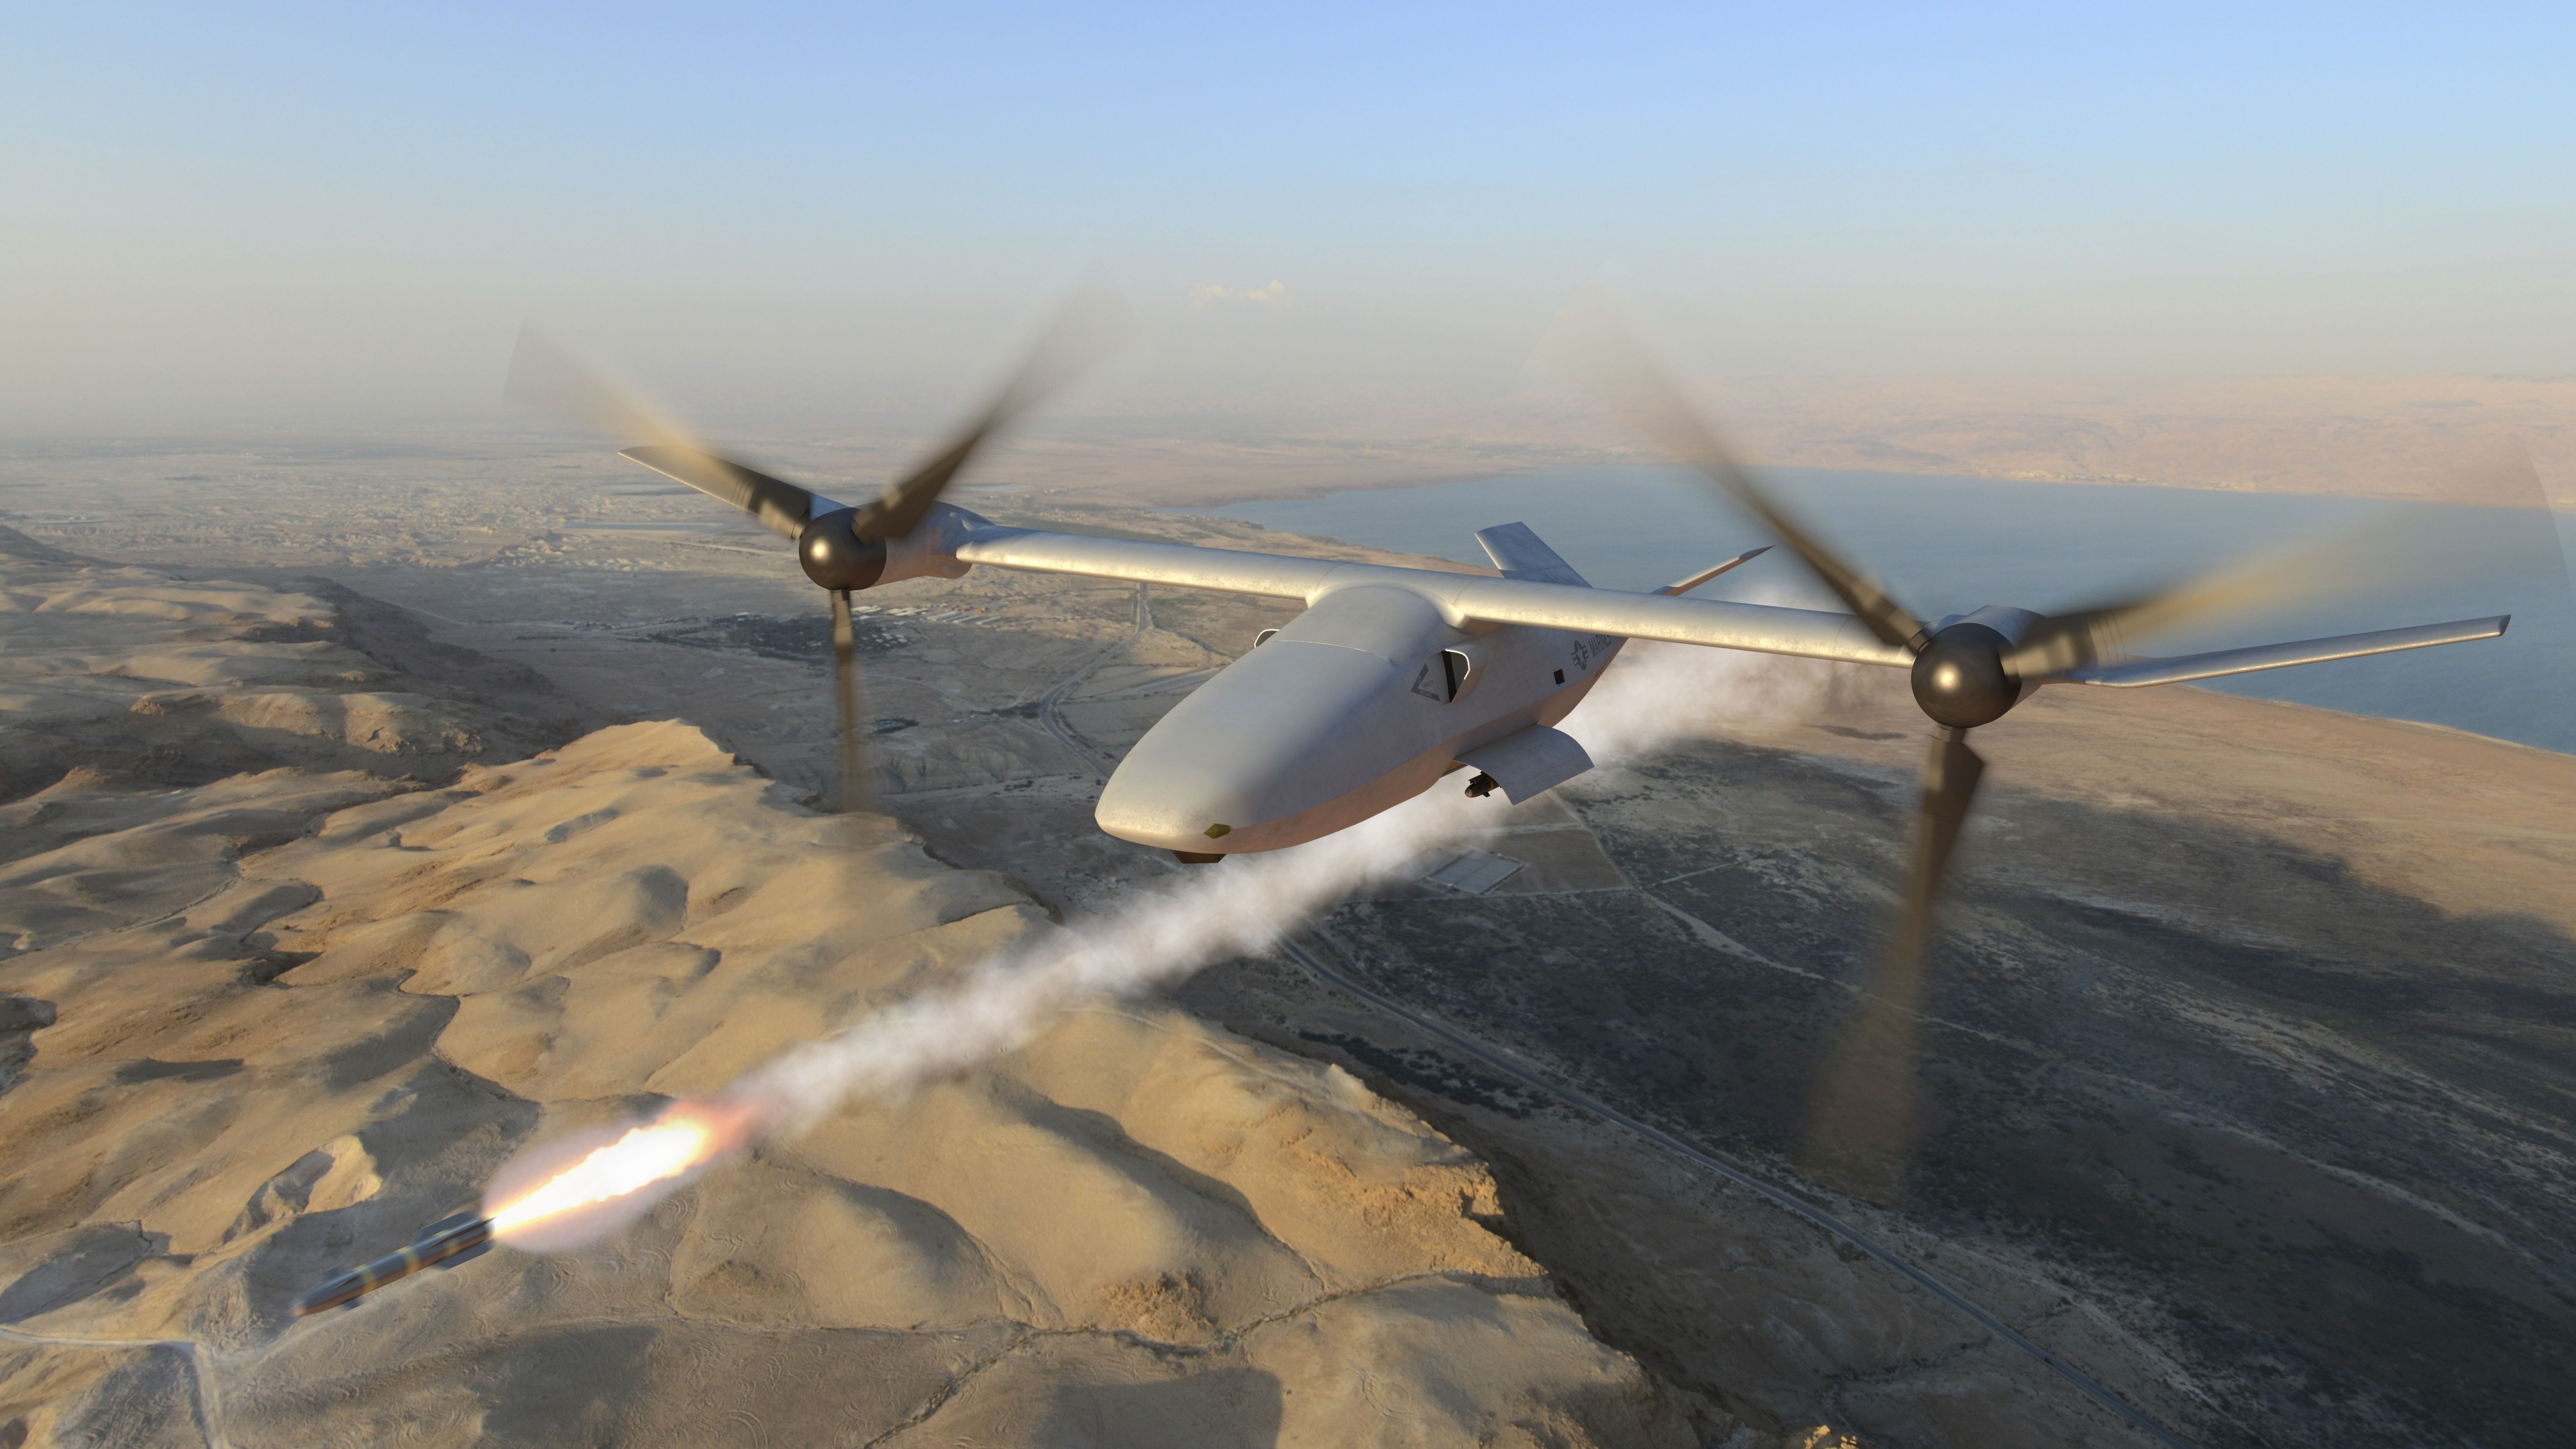 Tern tailsitter drone, Military drones, Wallpaper collection, Advanced aerial technology, 3840x2160 4K Desktop